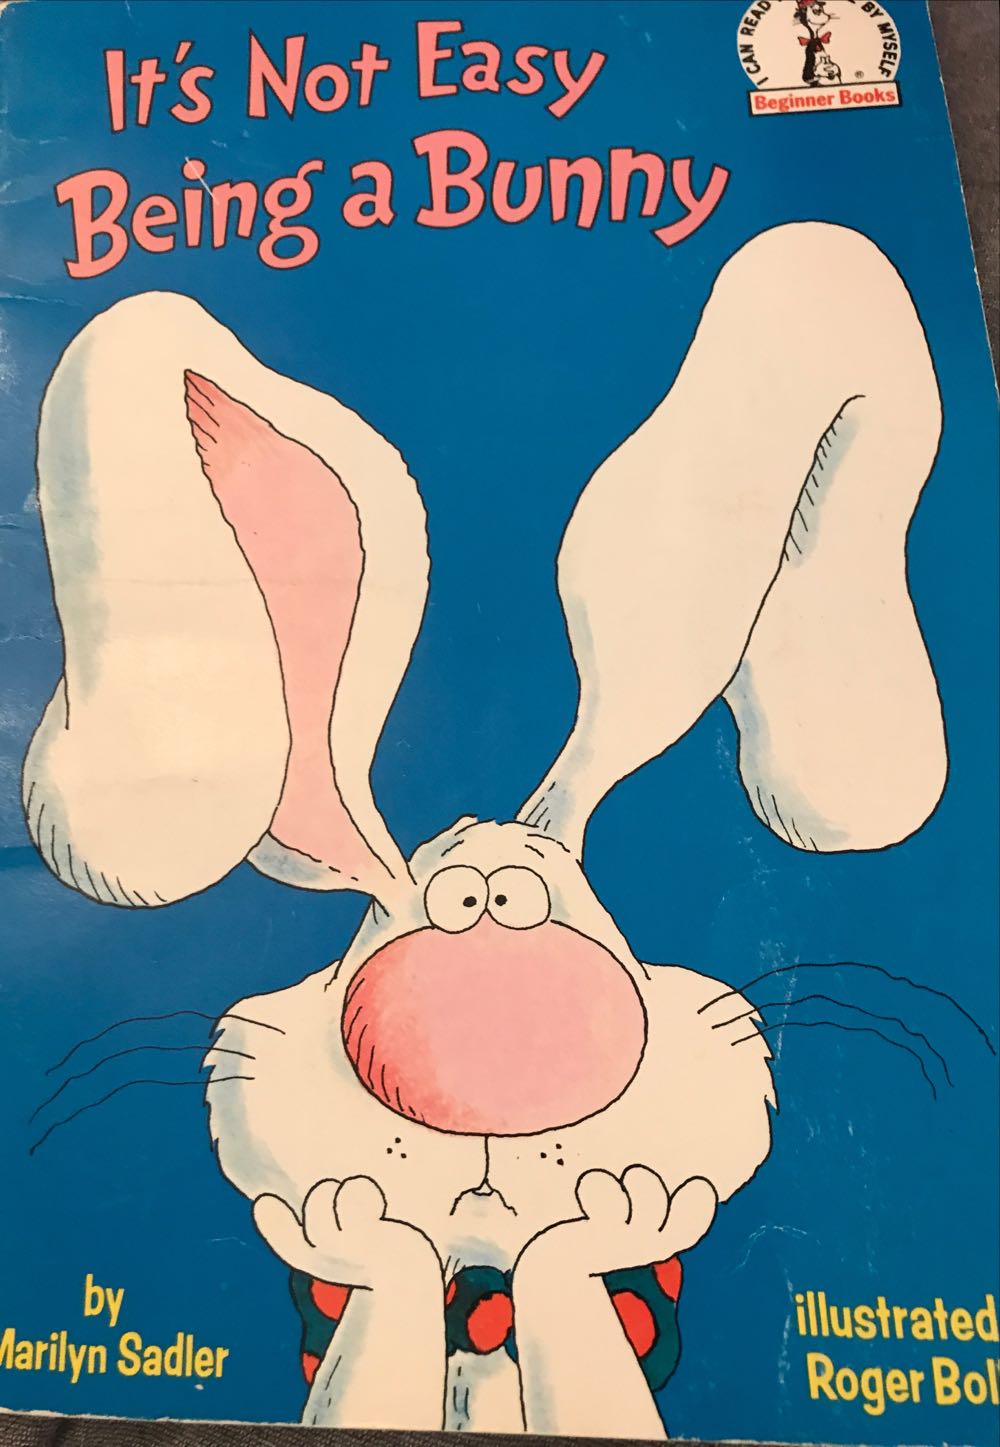 It’s Not Easy Being a Bunny - Marilyn Sadler (Random House Books for Young Readers) book collectible [Barcode 9780679854104] - Main Image 2